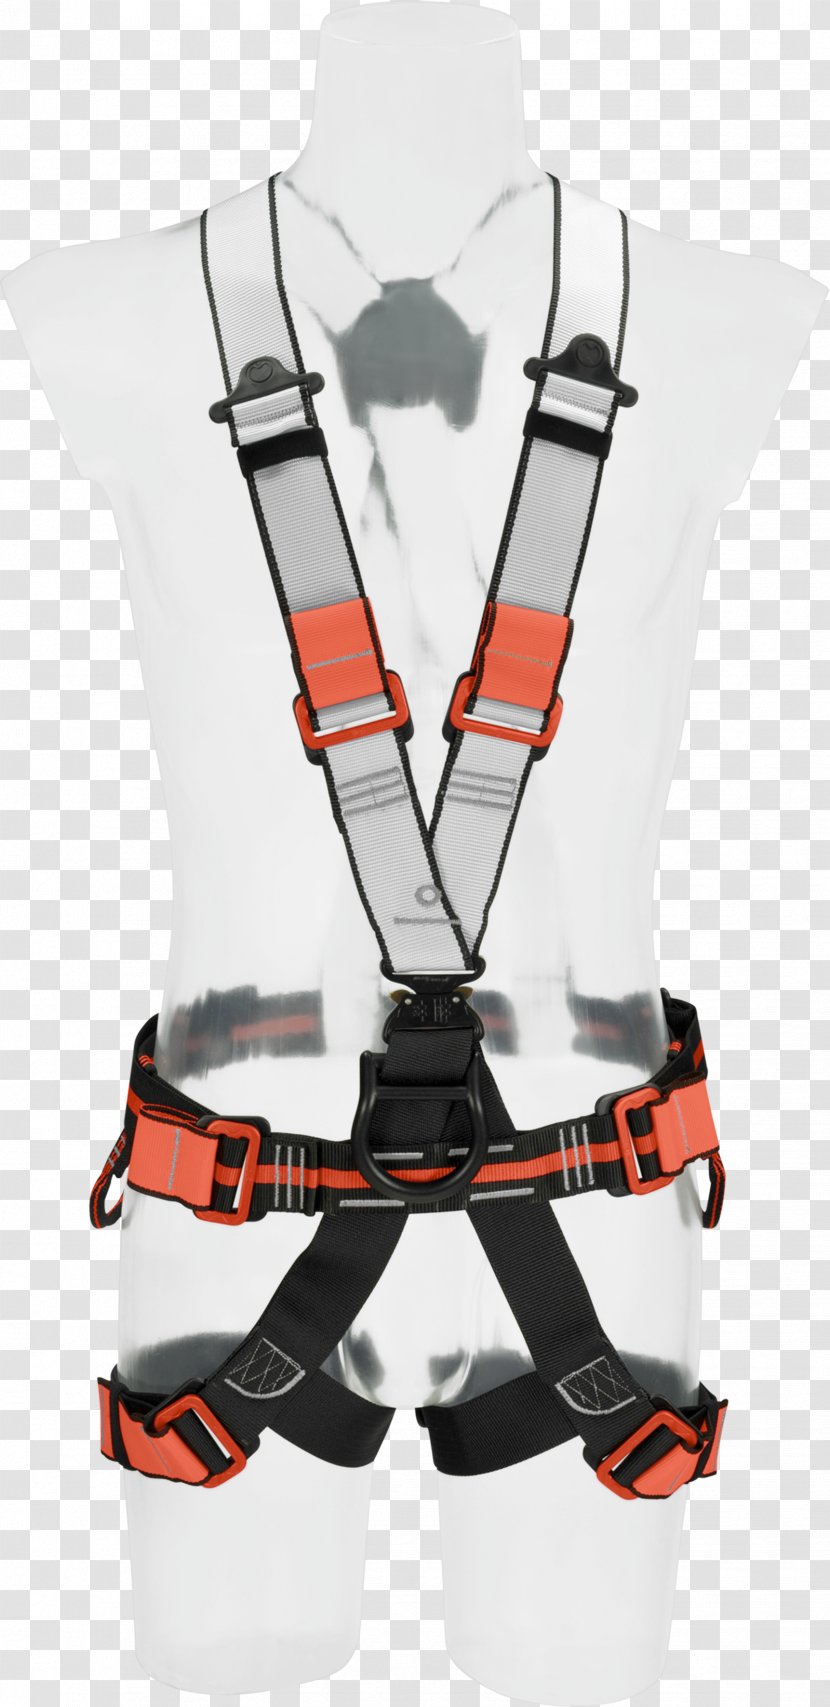 Climbing Harnesses Safety Harness Personal Protective Equipment Fall Protection - Lacrosse Gear Transparent PNG